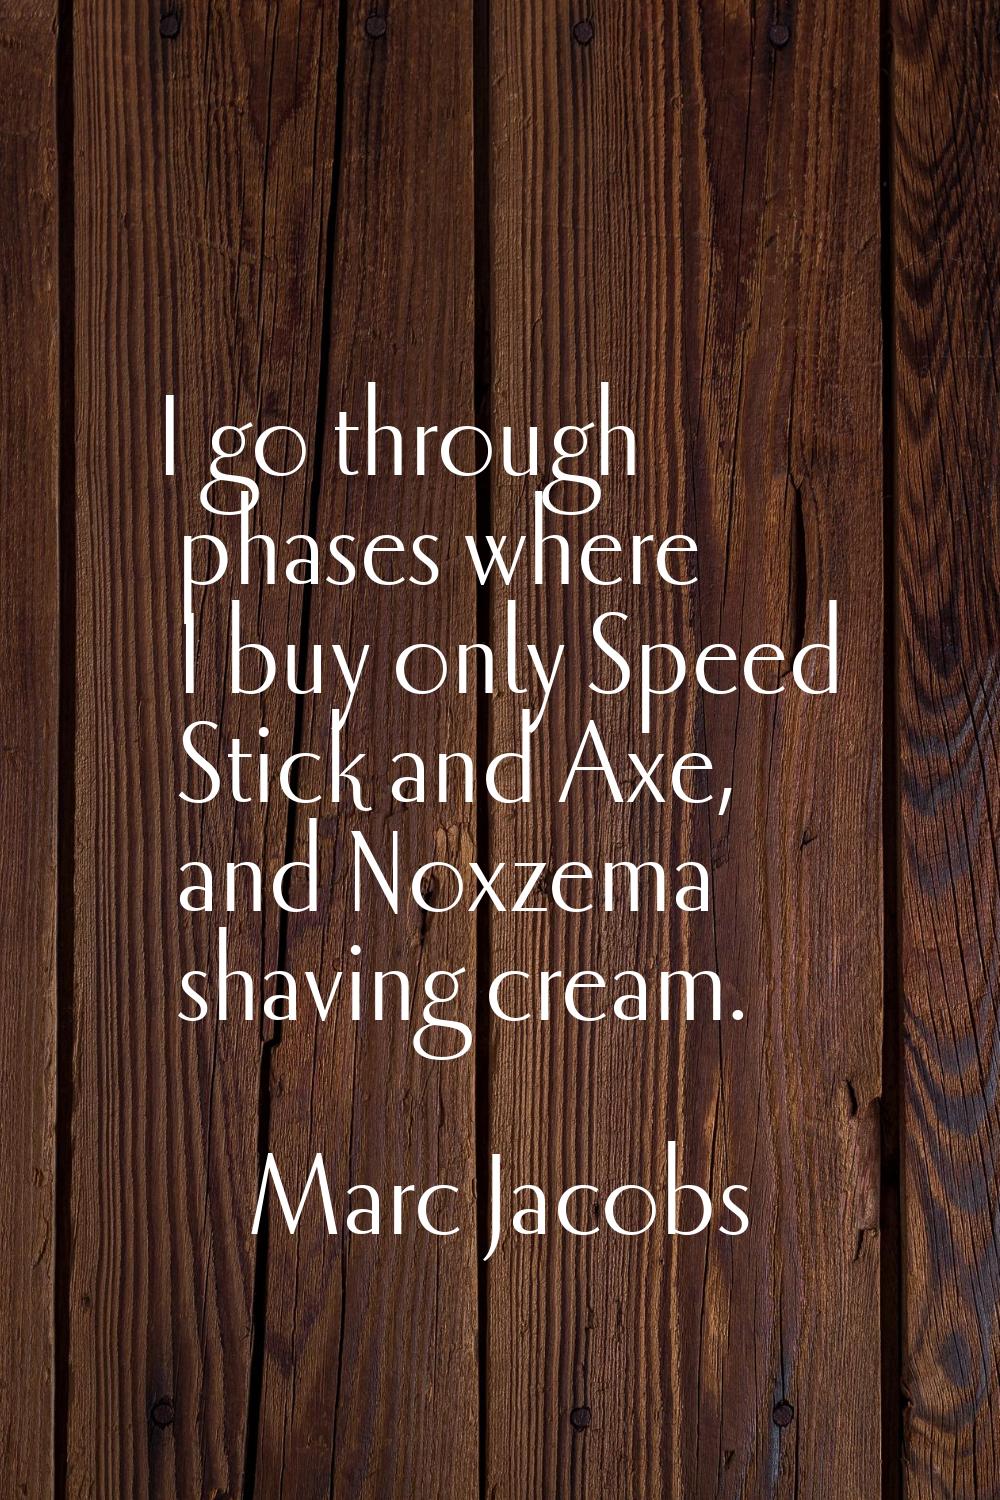 I go through phases where I buy only Speed Stick and Axe, and Noxzema shaving cream.